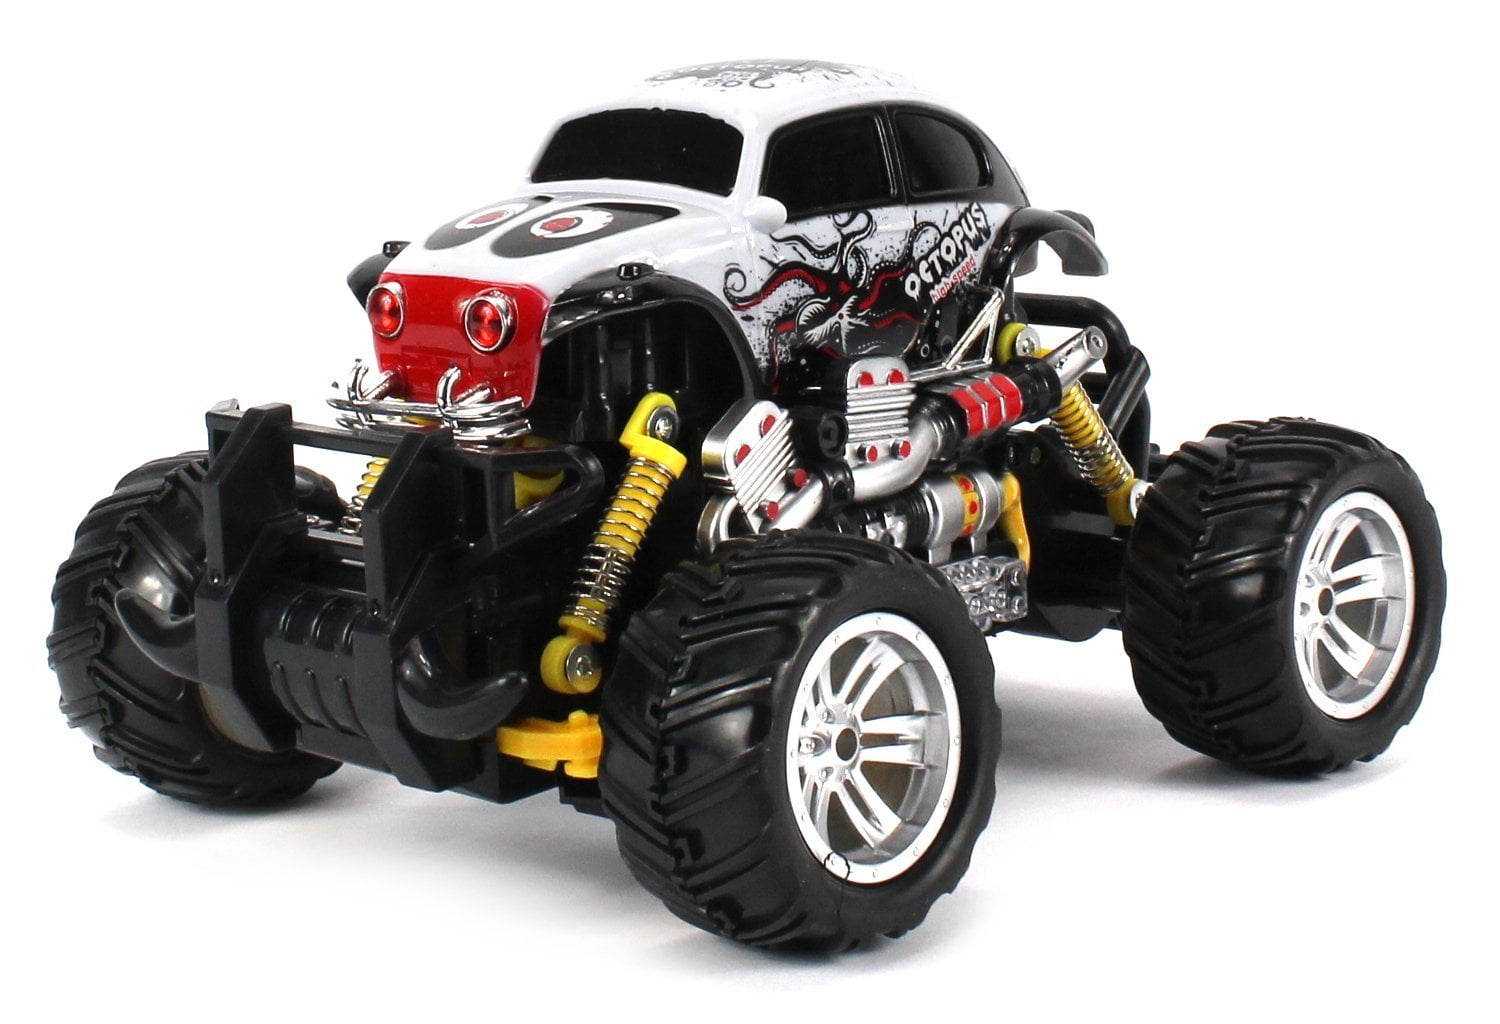 Graffiti Volkswagen Beetle Rc Off Road Monster Truck 1 18 Scale 4 Wheel Drive Rtr Working Hinged Spring Suspension Perform Various Drifts Colors May Vary Walmart Com Walmart Com